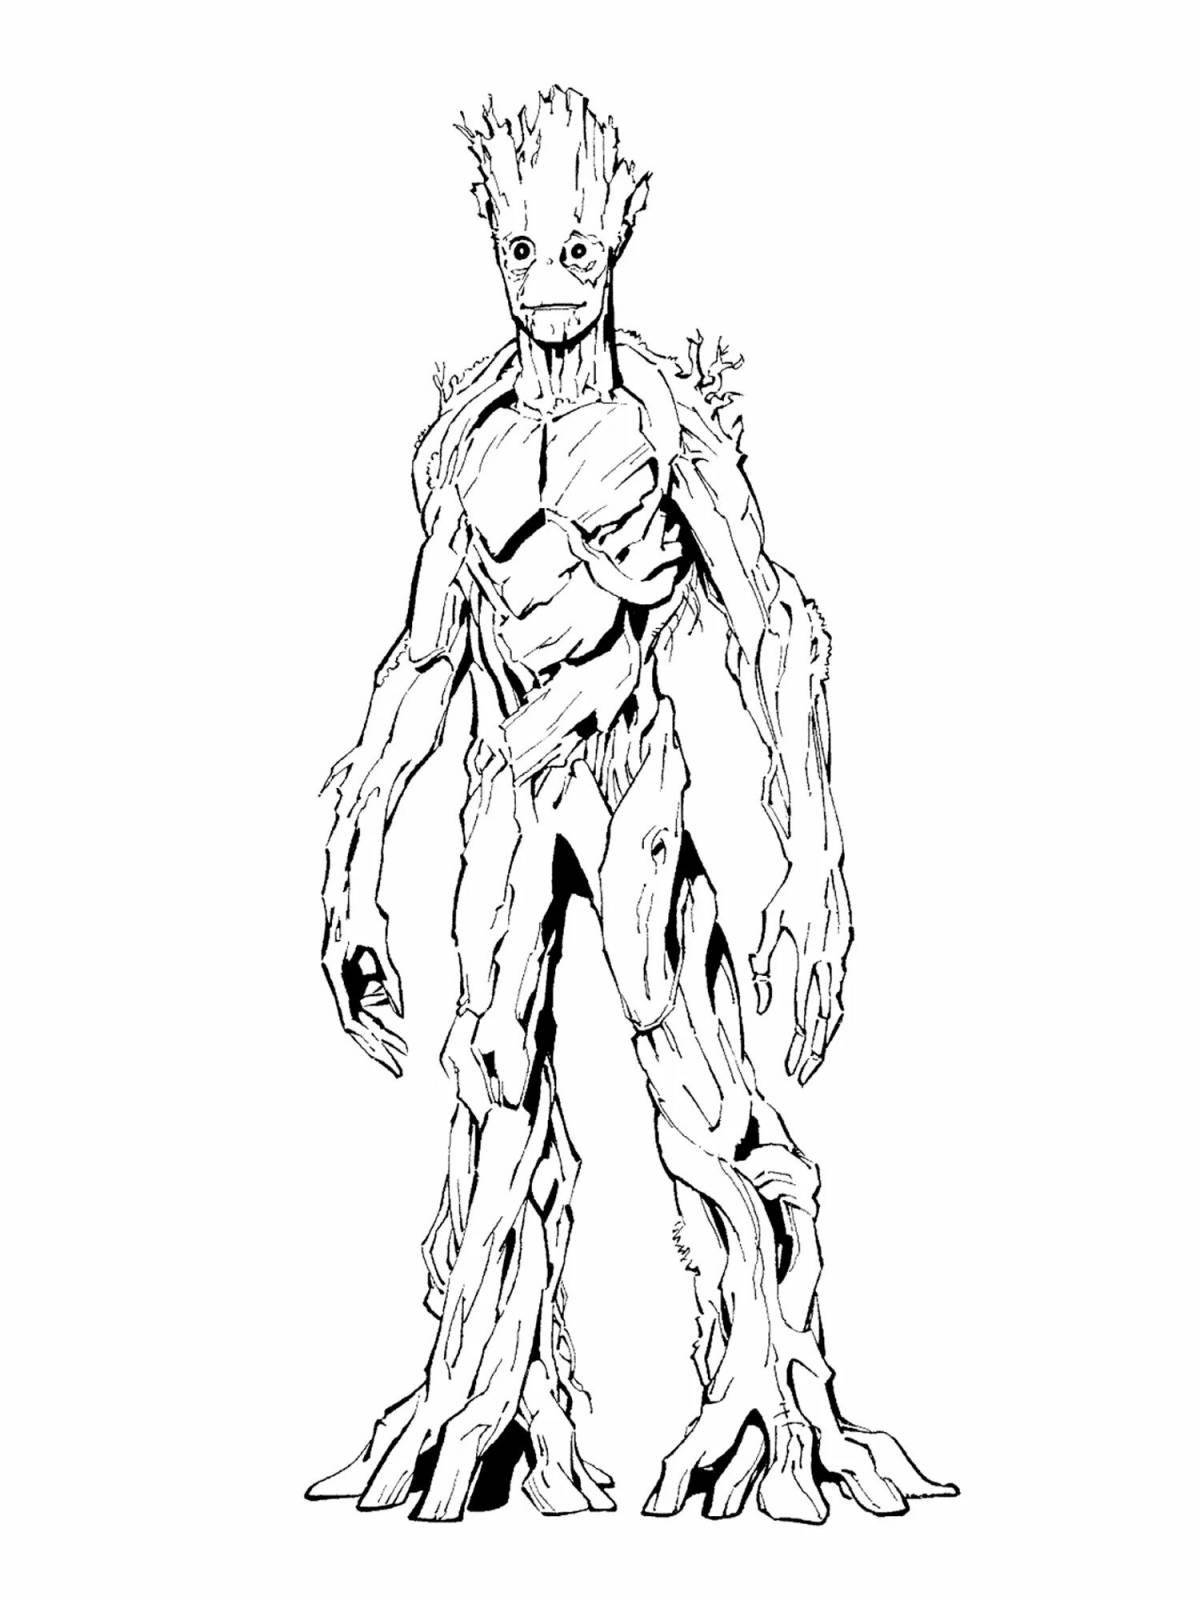 Groot from Marvel #3